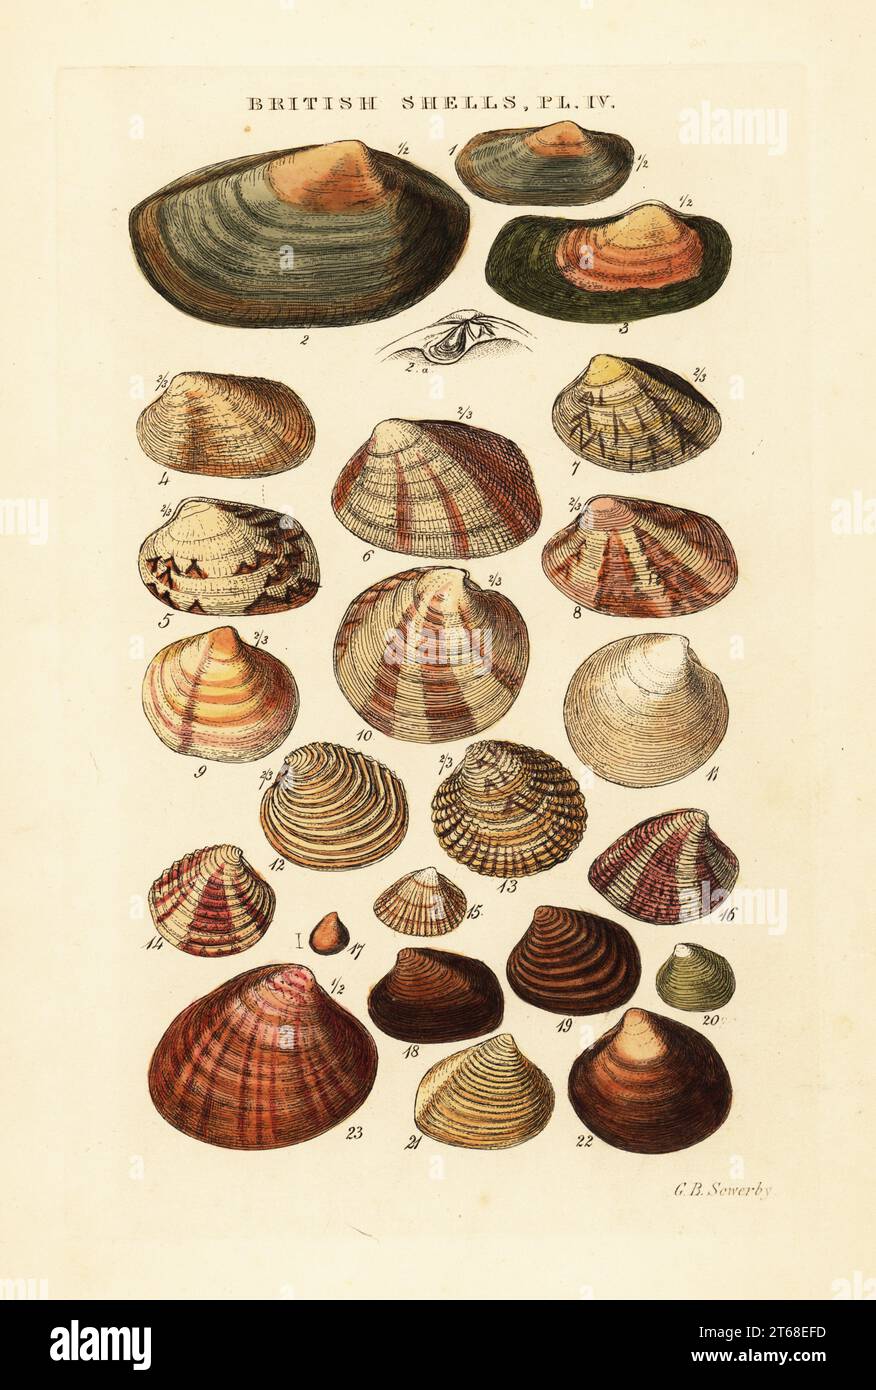 Saltwater clams, Venus casina, Astarte elliptica, Lutraria, Tapes, Lucinopsis, etc. Handcoloured copperplate engraving by George Brettingham Sowerby from his own Illustrated Index of British Shells, Sowerby and Simpkin, Marshall & Co., London, 1859. George Brettingham Sowerby II (1812-1884), British naturalist, illustrator, and conchologist. . Stock Photo